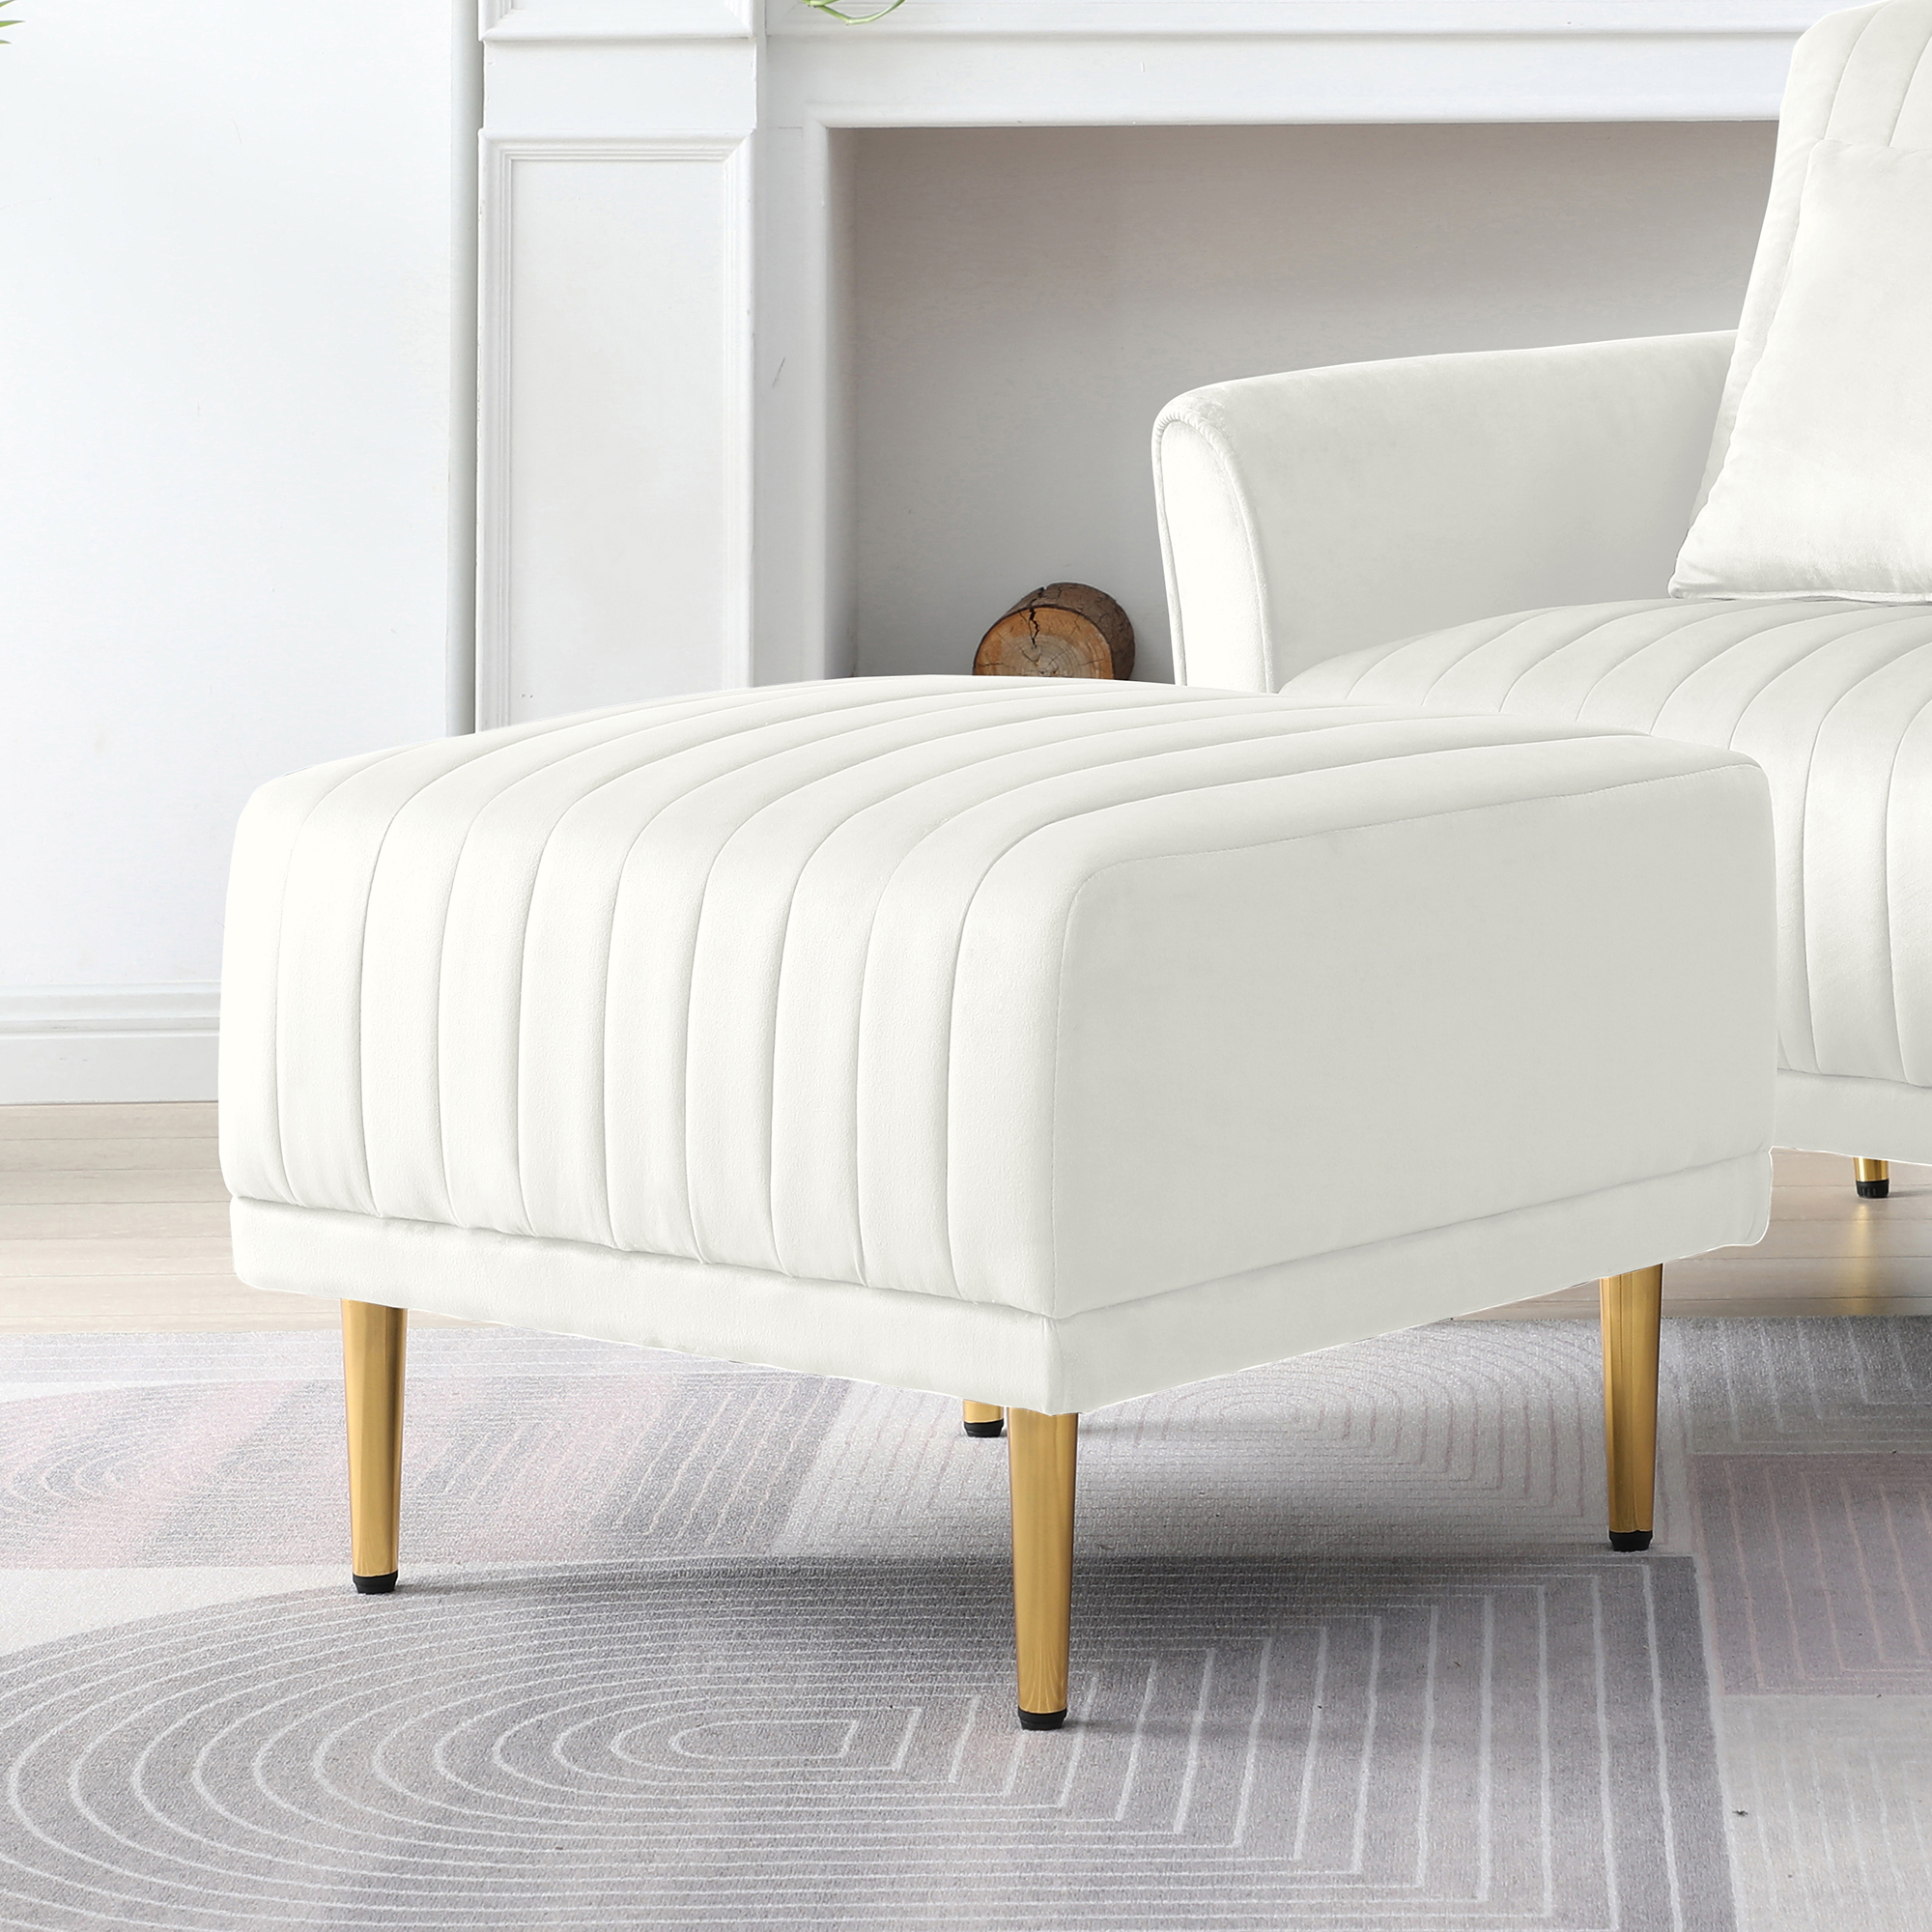 Square Ottoman Cream Velvet Stool Seat with Metal Legs, Footrest for Bedroom to match with Living Room Chairs Armchairs